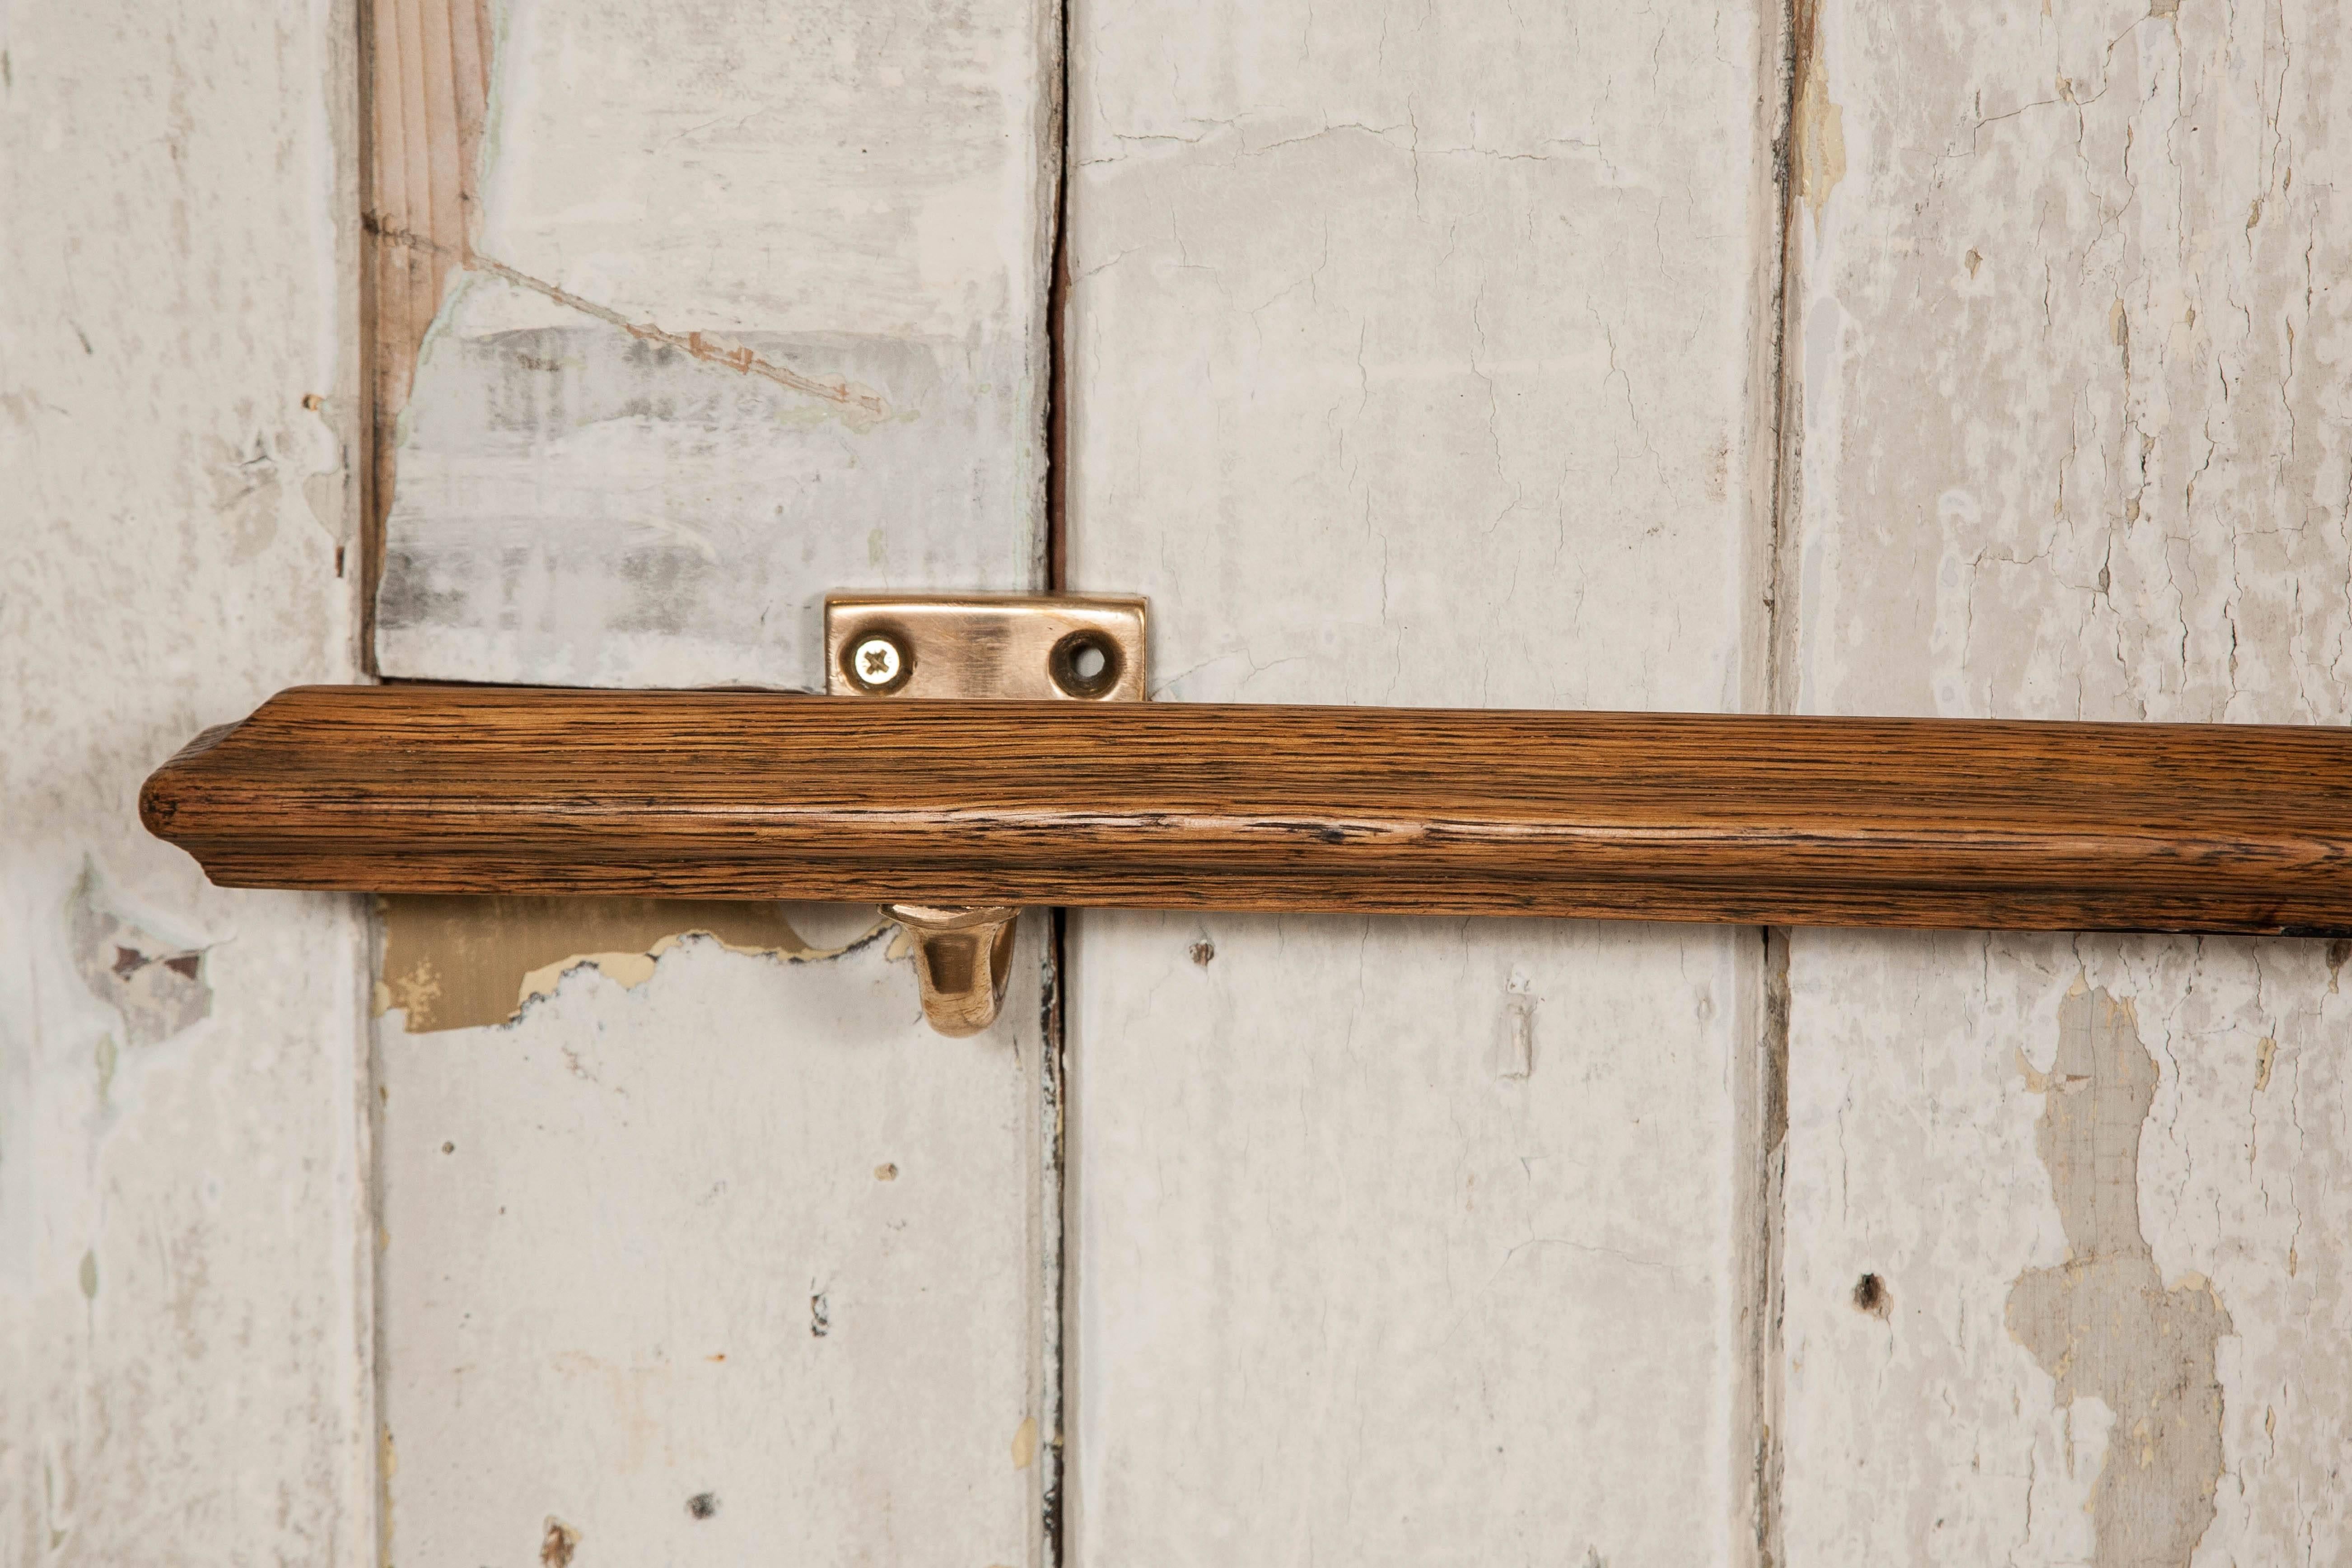 A set of original antique handrails in solid oak with attractive brass fittings.

We have several of two lengths of handrails available:

17 handrails at 130cm long x 5cm thick x 9cm deep
7 handrails at 195cm long x 5cm thick x 9cm deep

